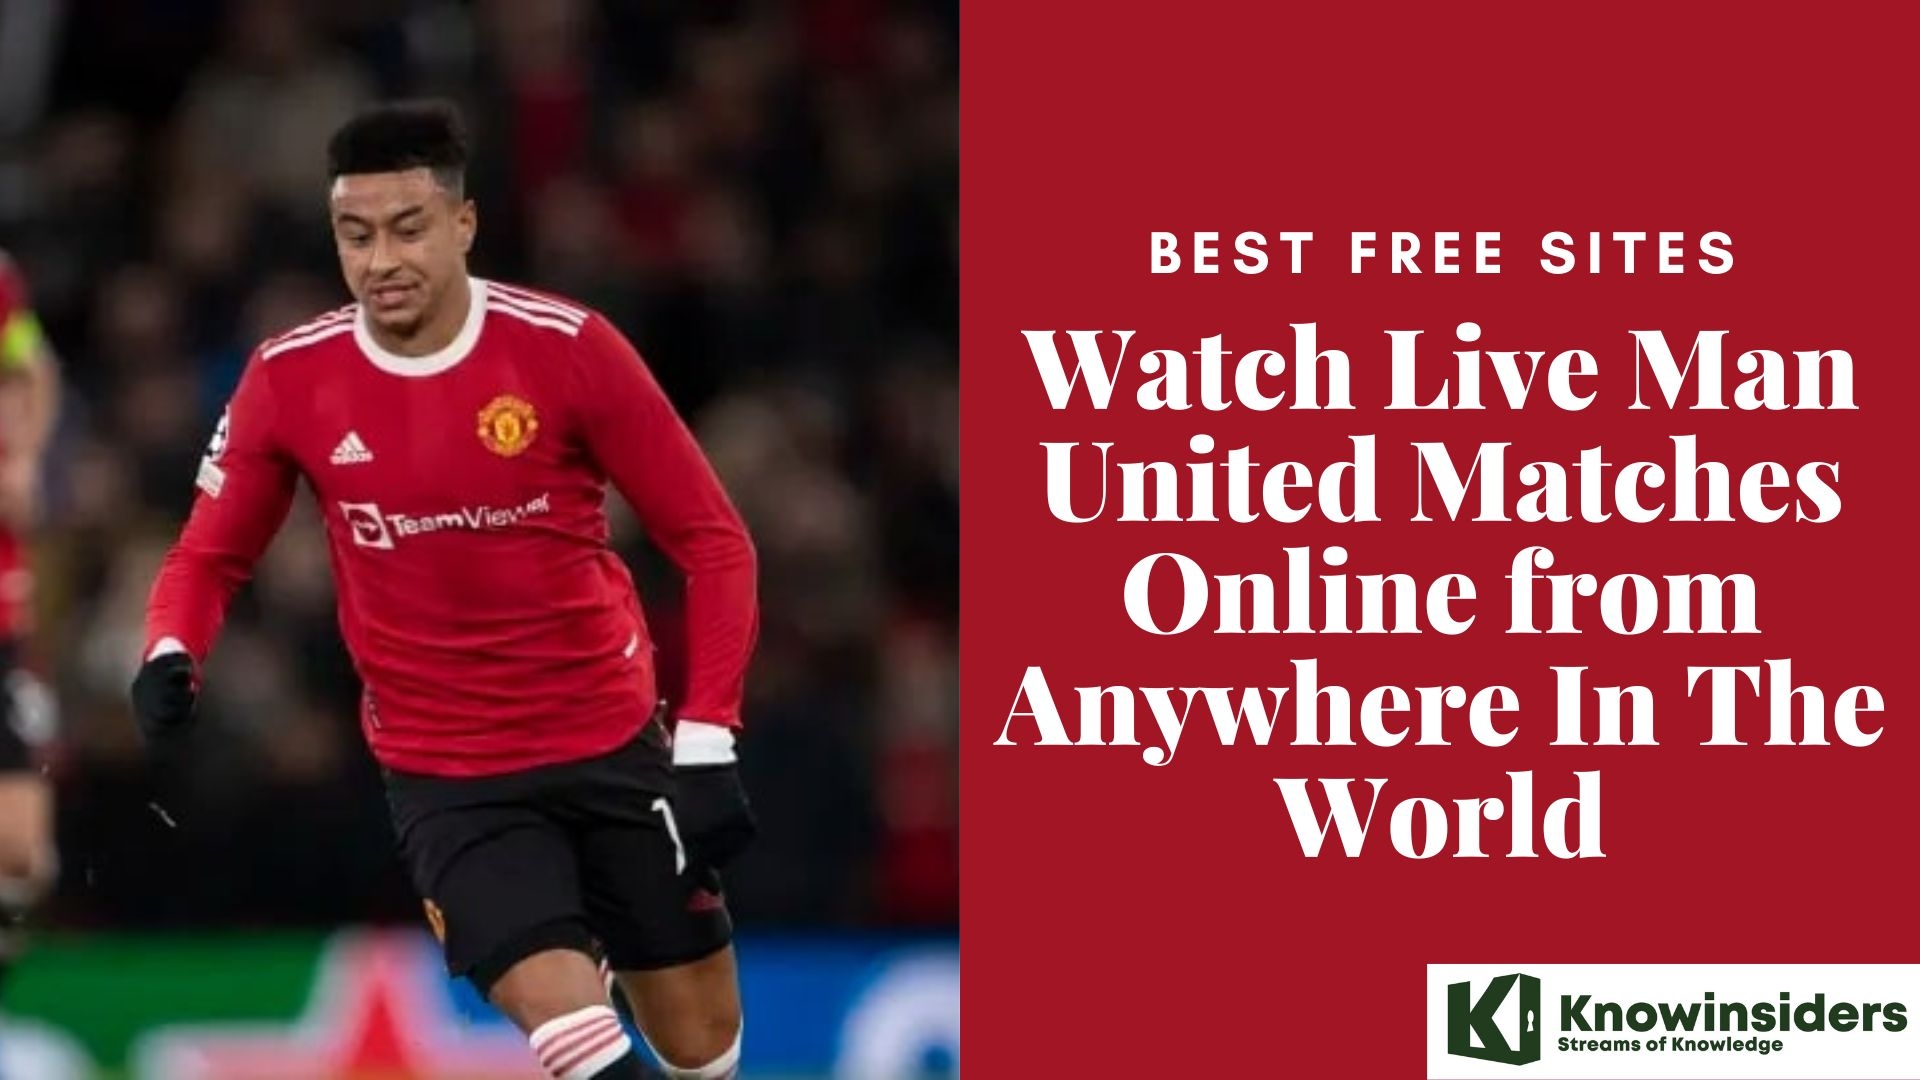 Best Free Sites to Watch Live Man United Matches Online from Anywhere In The World